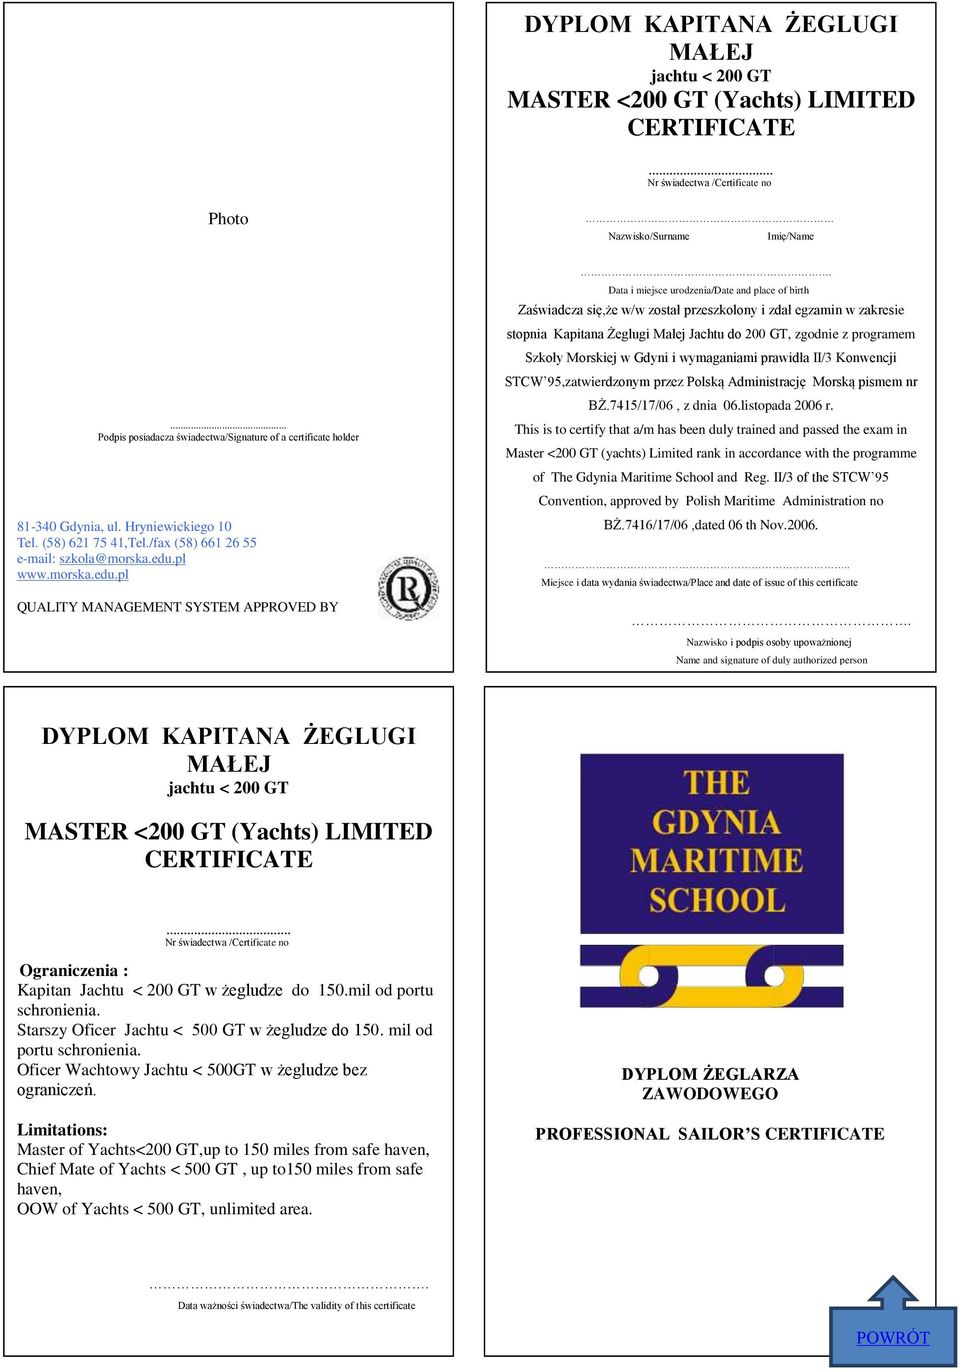 Master <200 GT (yachts) Limited rank in accordance with the programme of The Gdynia Maritime School and Reg. II/3 of the STCW 95 Convention, approved by Polish Maritime Administration no BŻ.